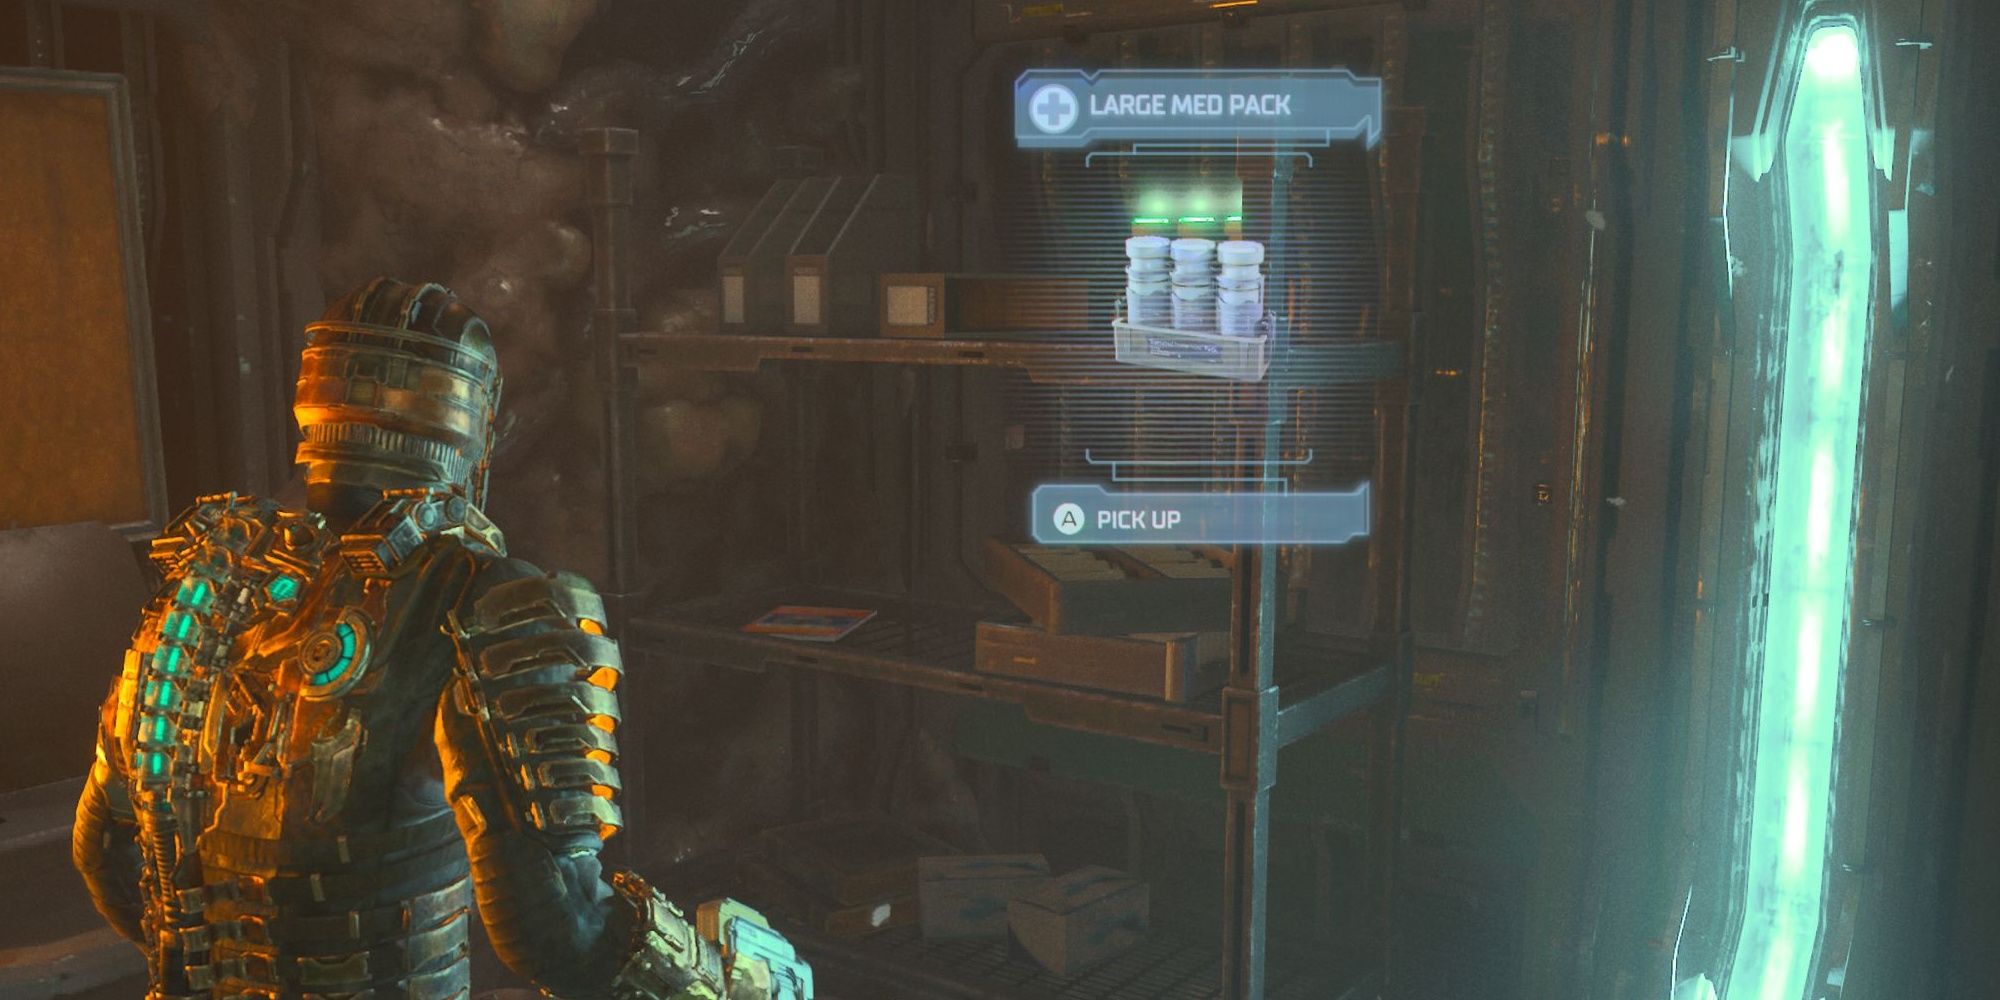 Finding a rare large med pack in the Dead Space remake.